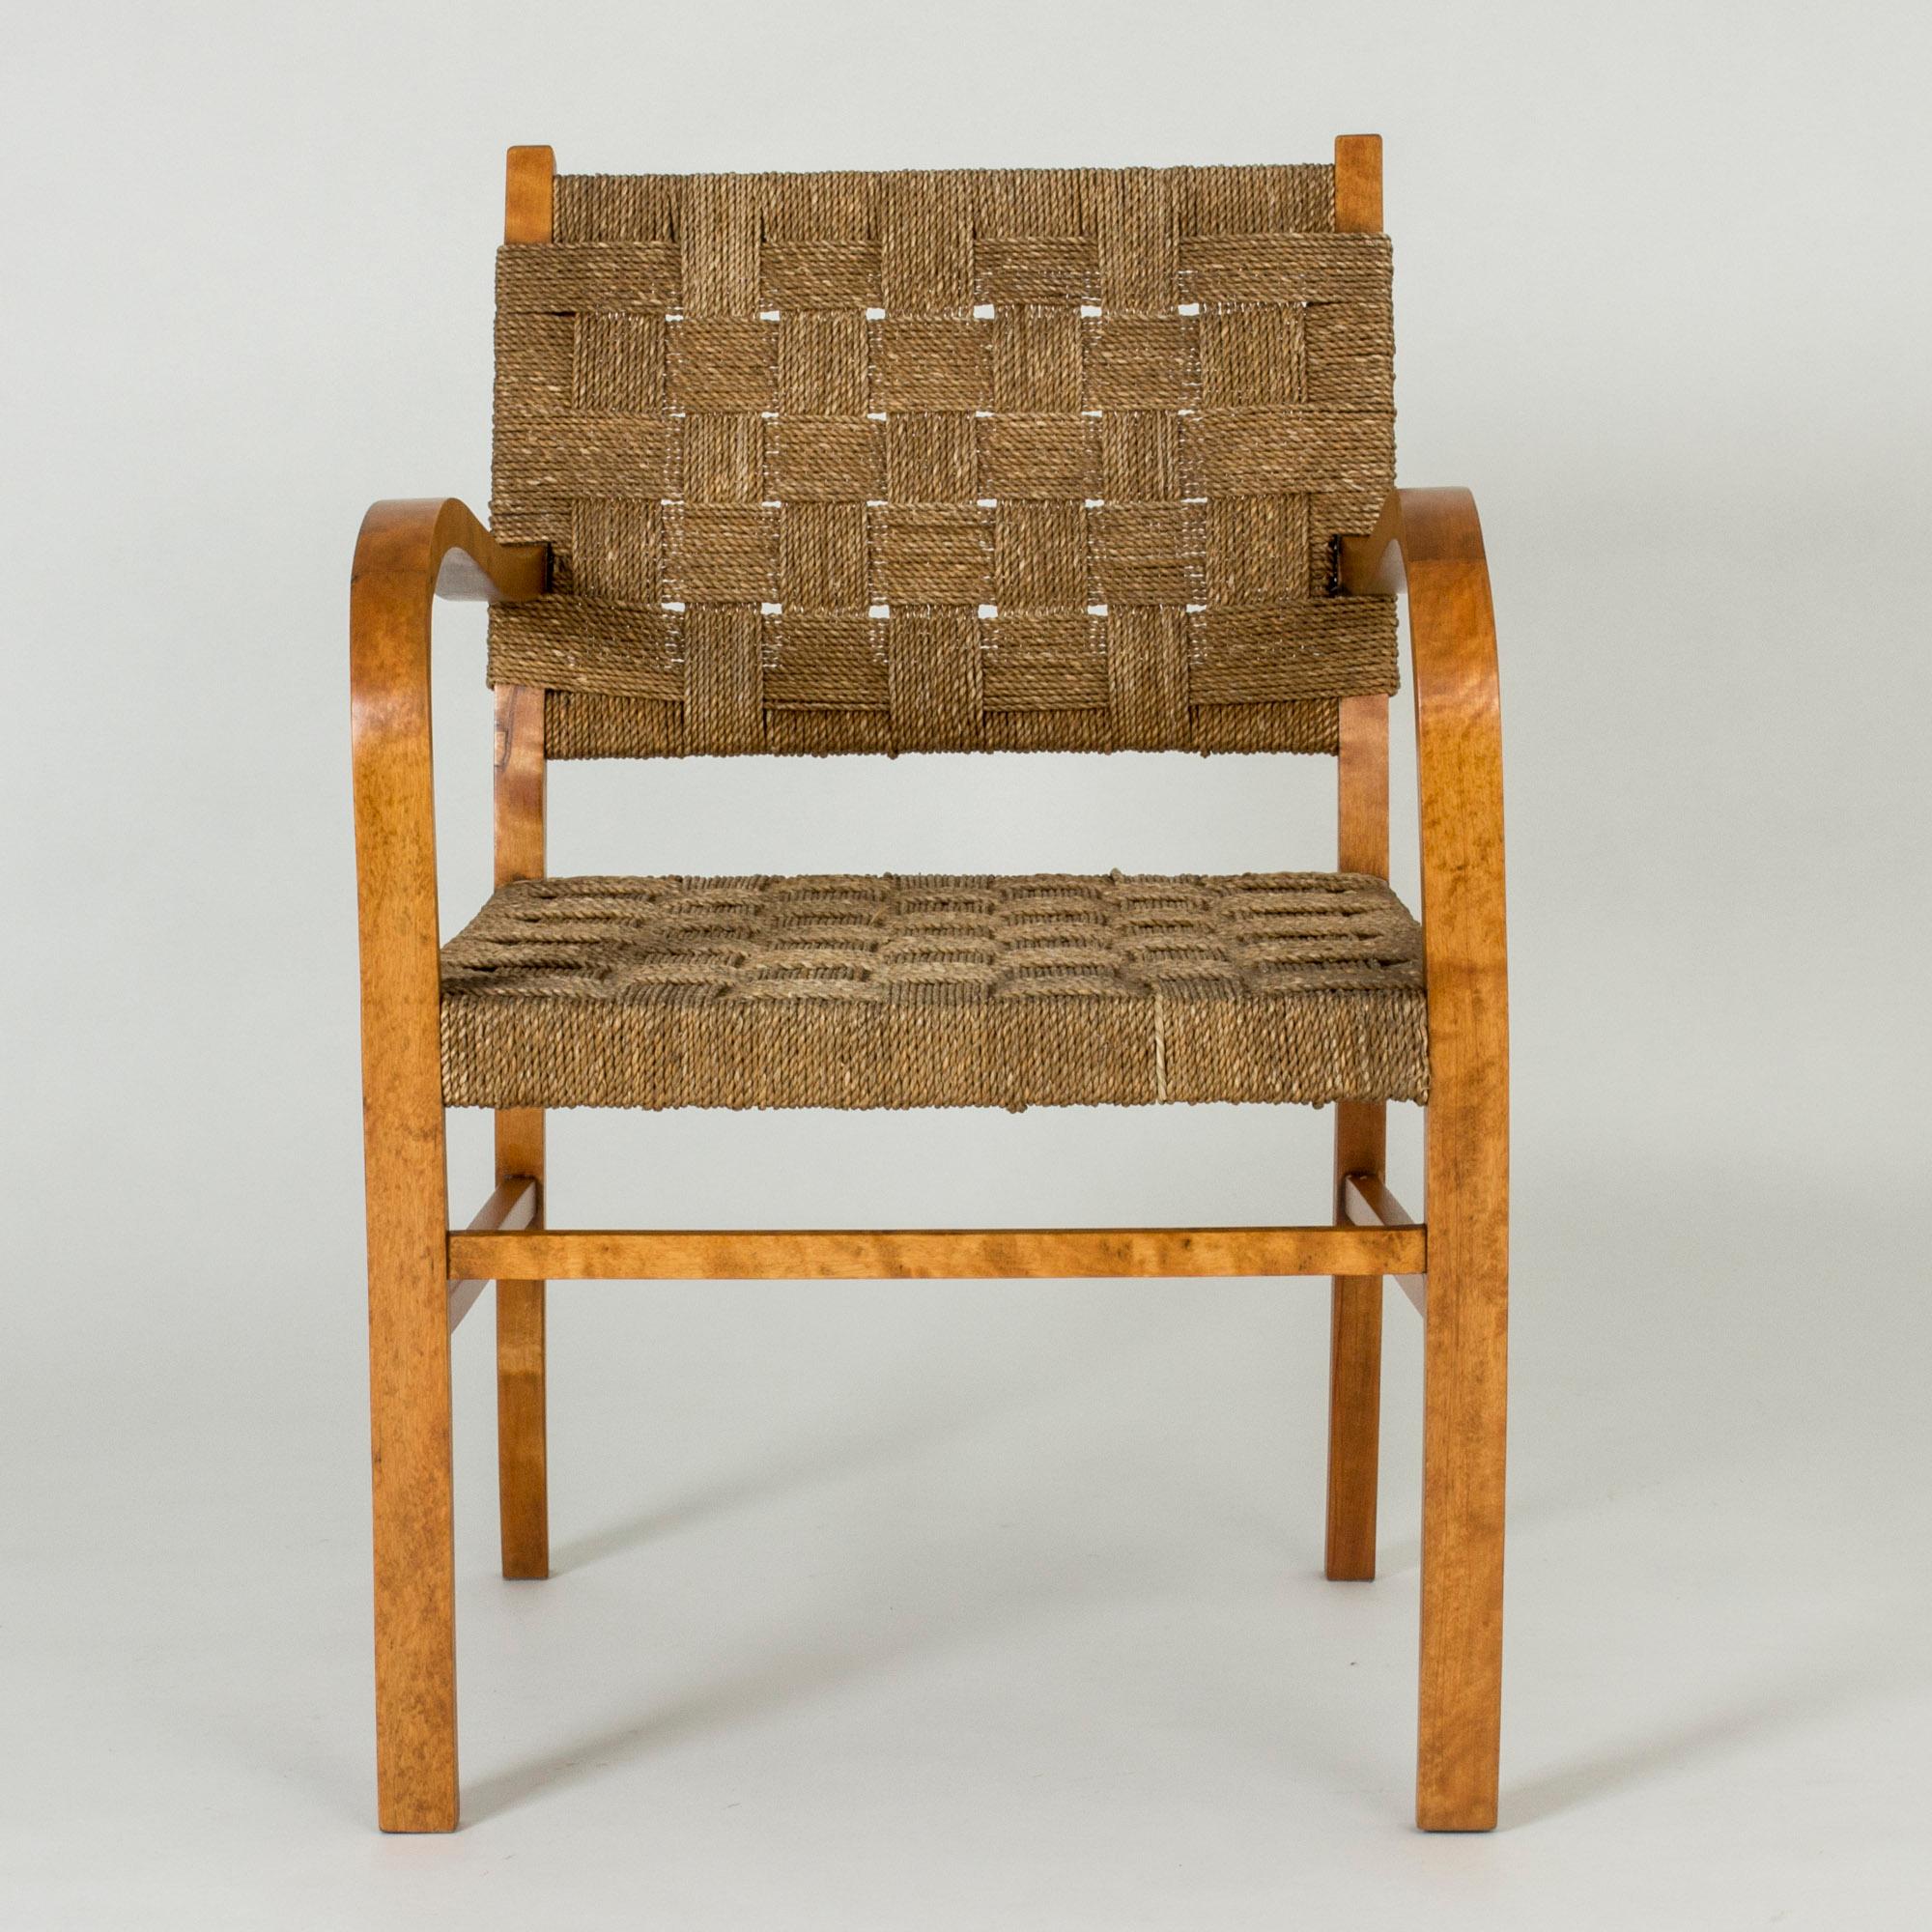 Beautiful functionalist armchair by Axel Larsson, with curved armrests creating a lovely, open silhouette. Made with a stained wooden frame and rope seat and backs. The seat has been reupholstered.